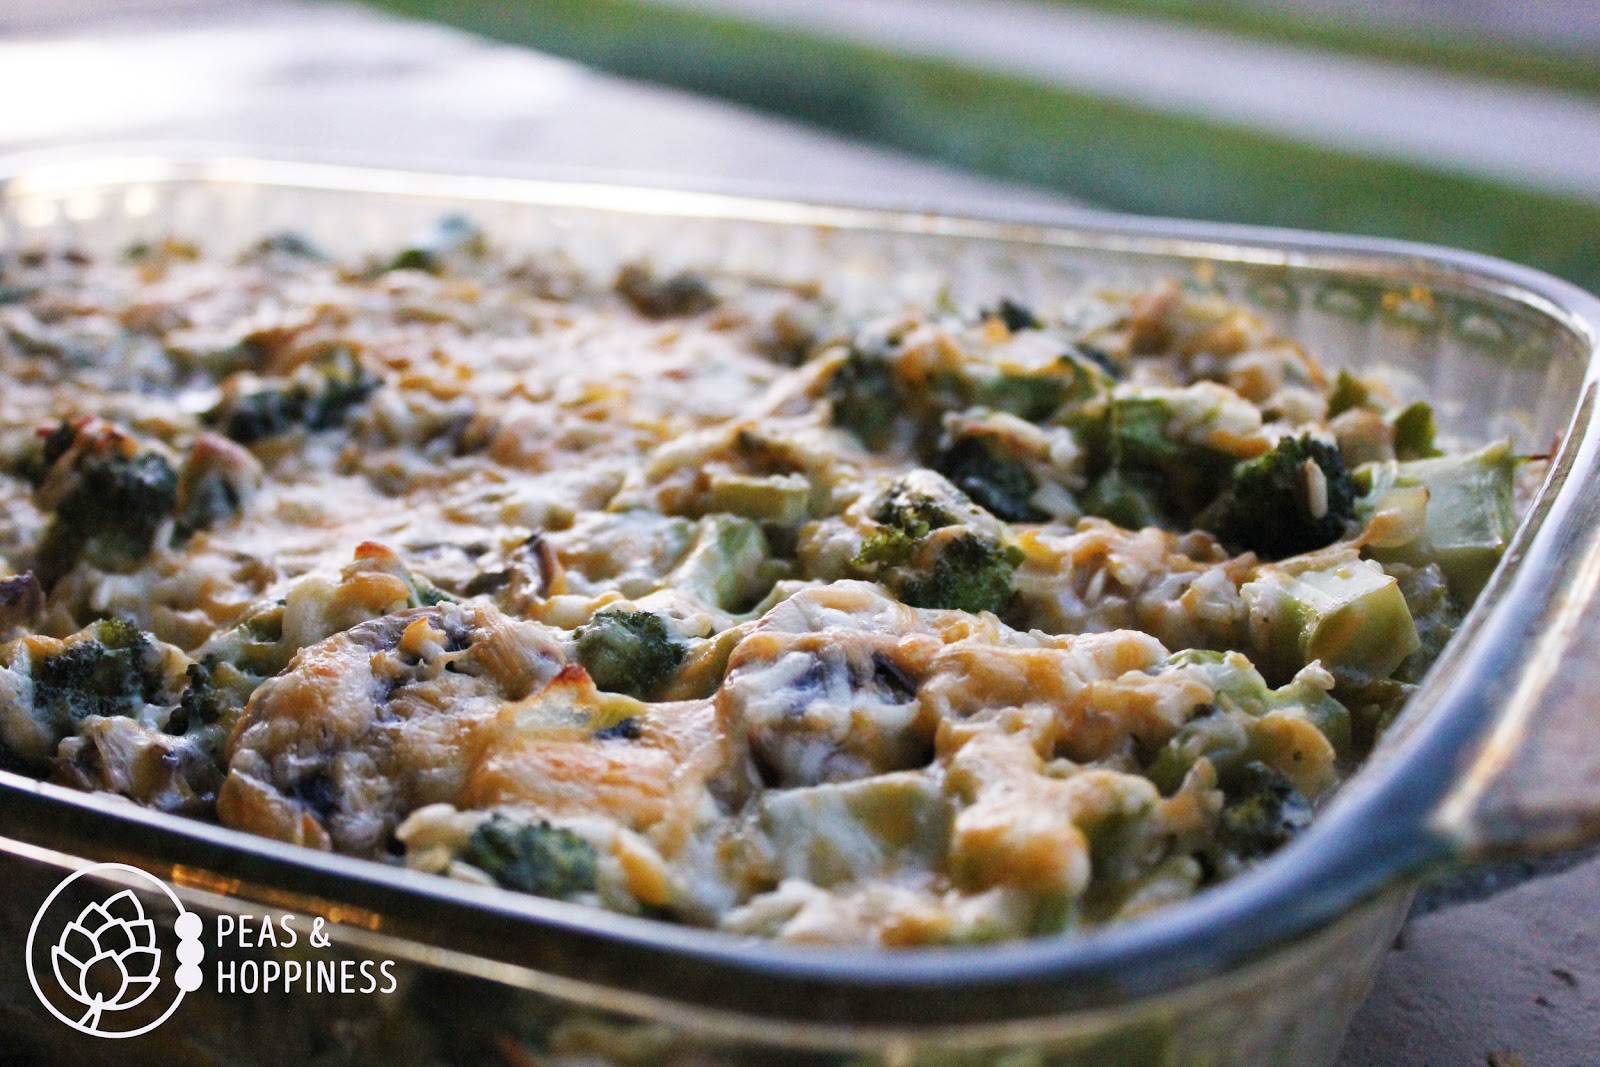 Eating gluten-free can still be delicious! Above is gluten-free  All-Natural Broccoli Rice Casserole . Click link for the recipe!